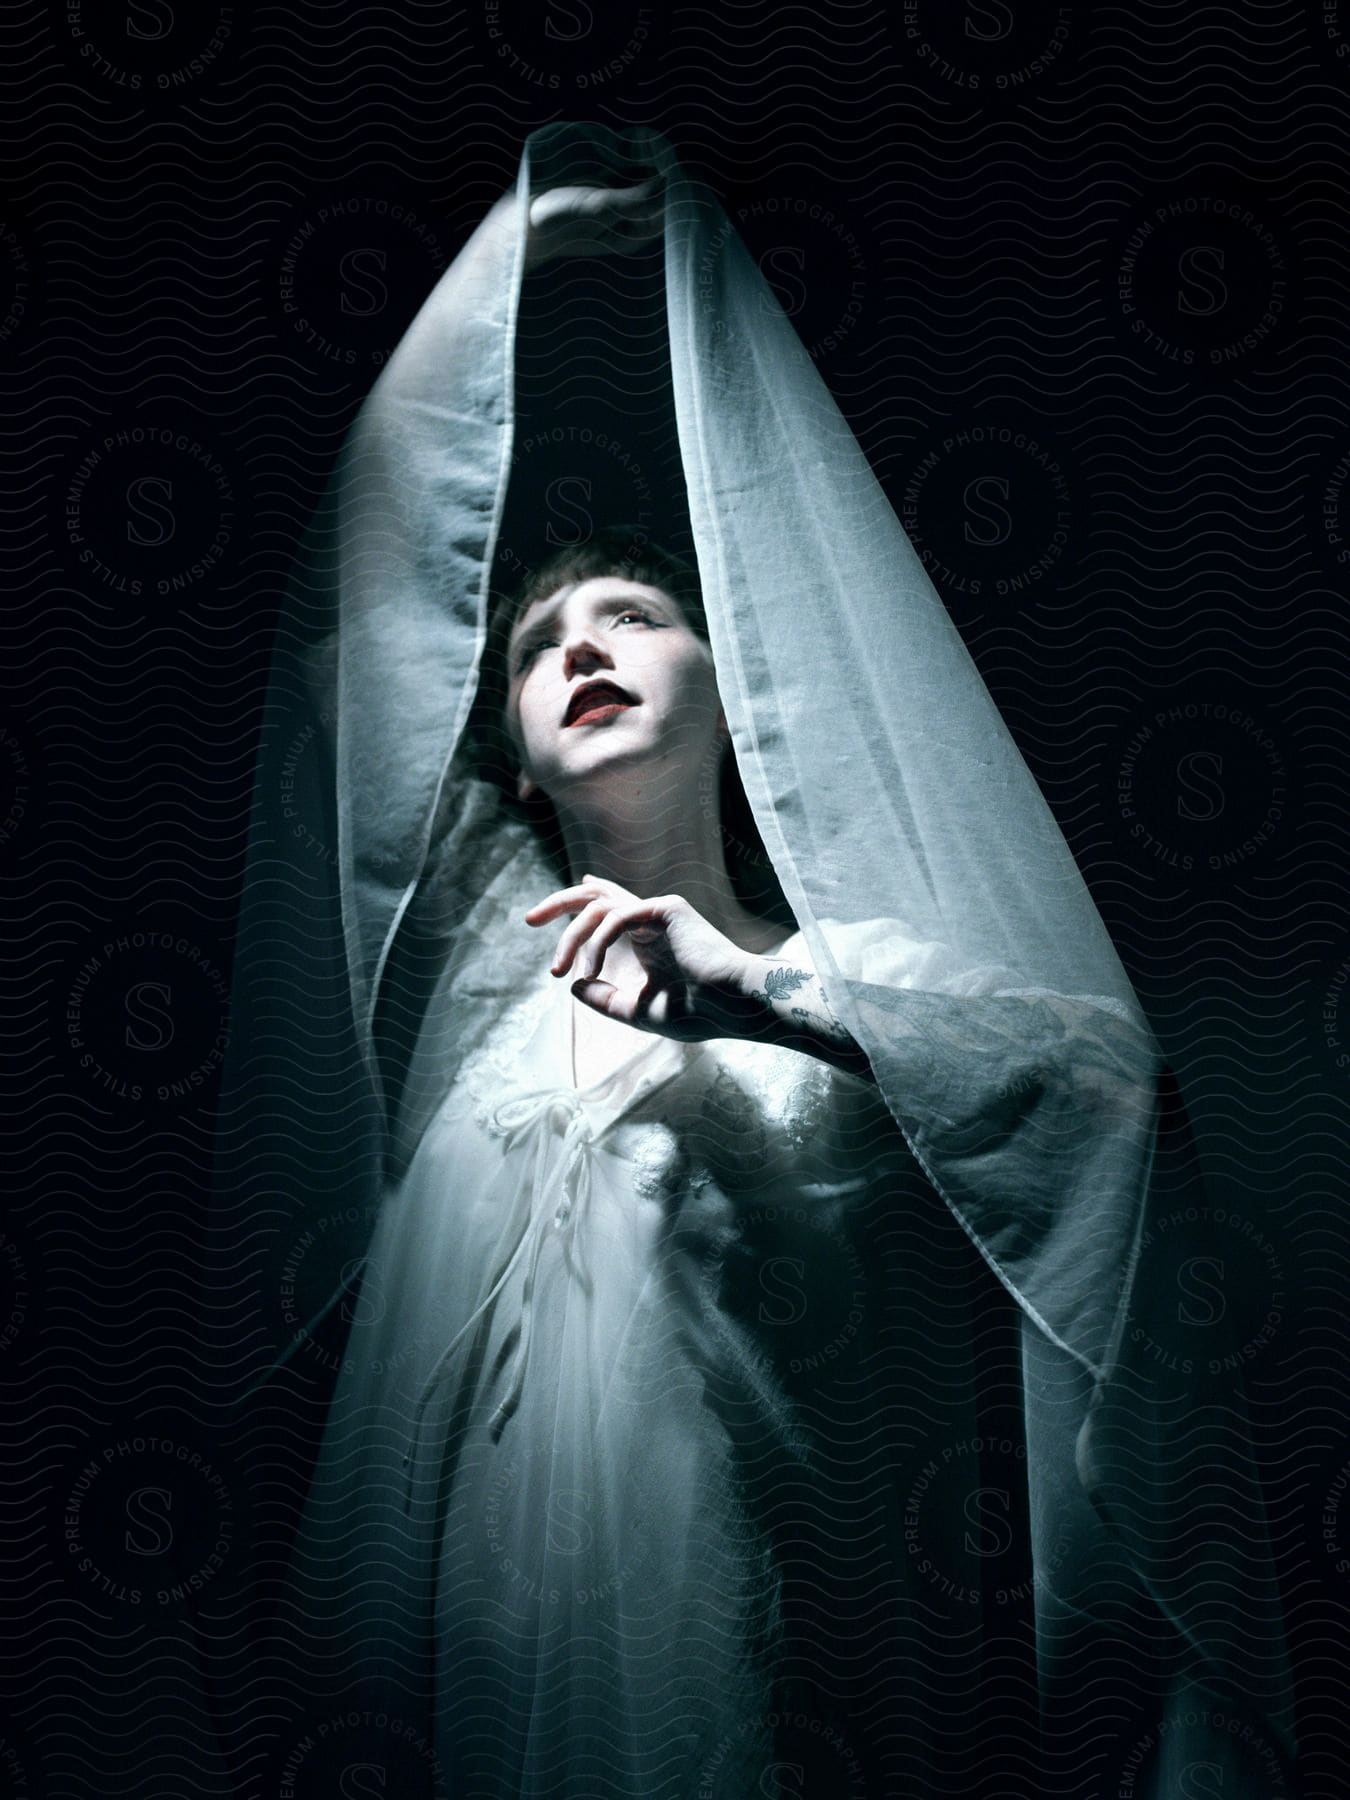 A woman in white gesturing with a veil